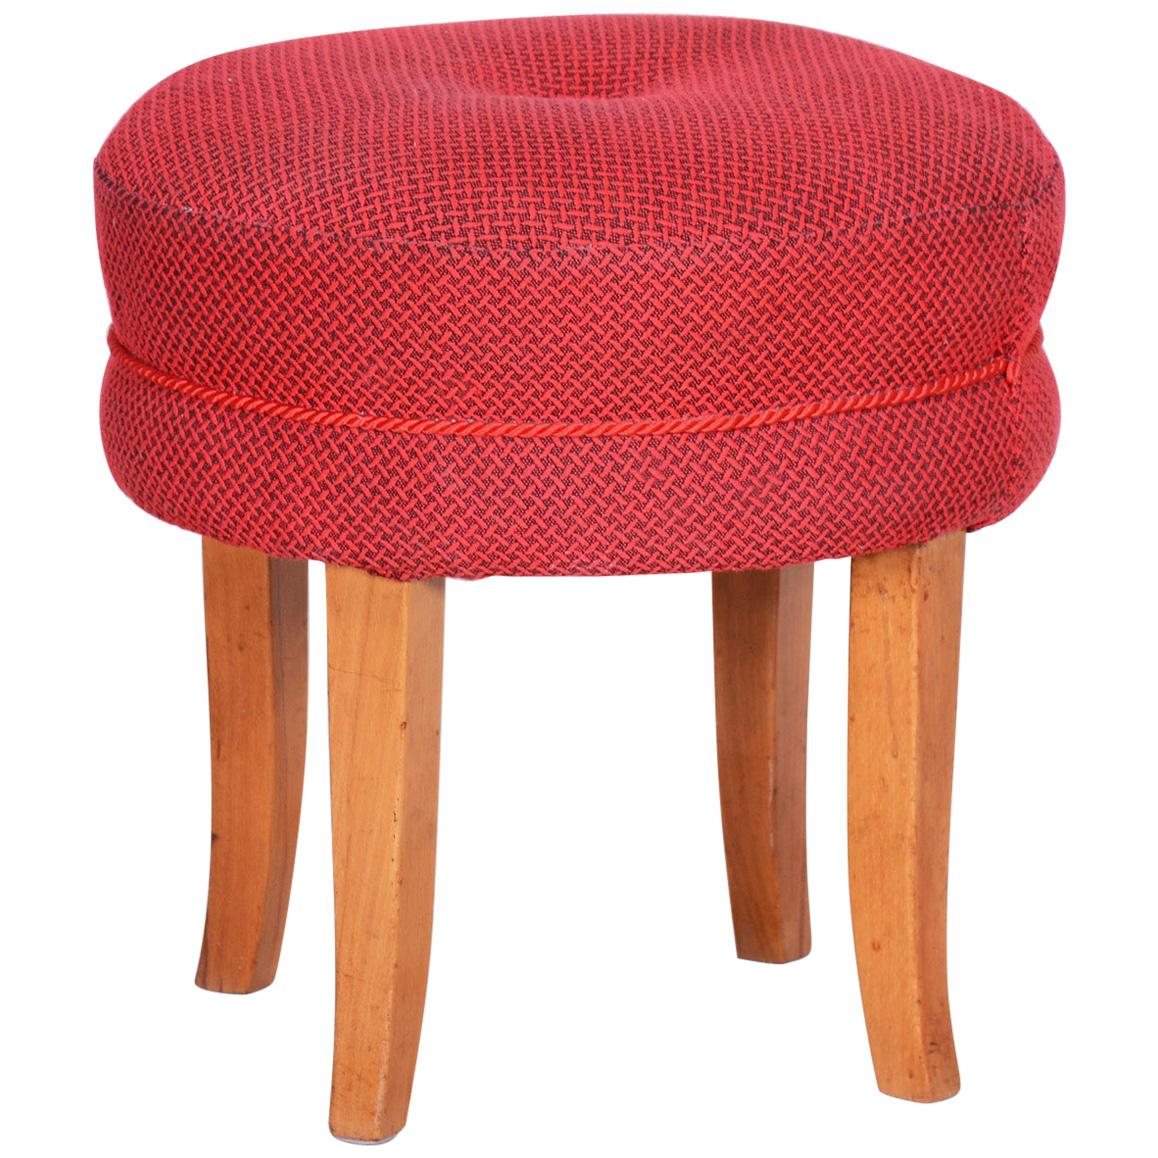 Czech Red Beech Midcentury Stool, Original Well Preserved Condition, 1950s